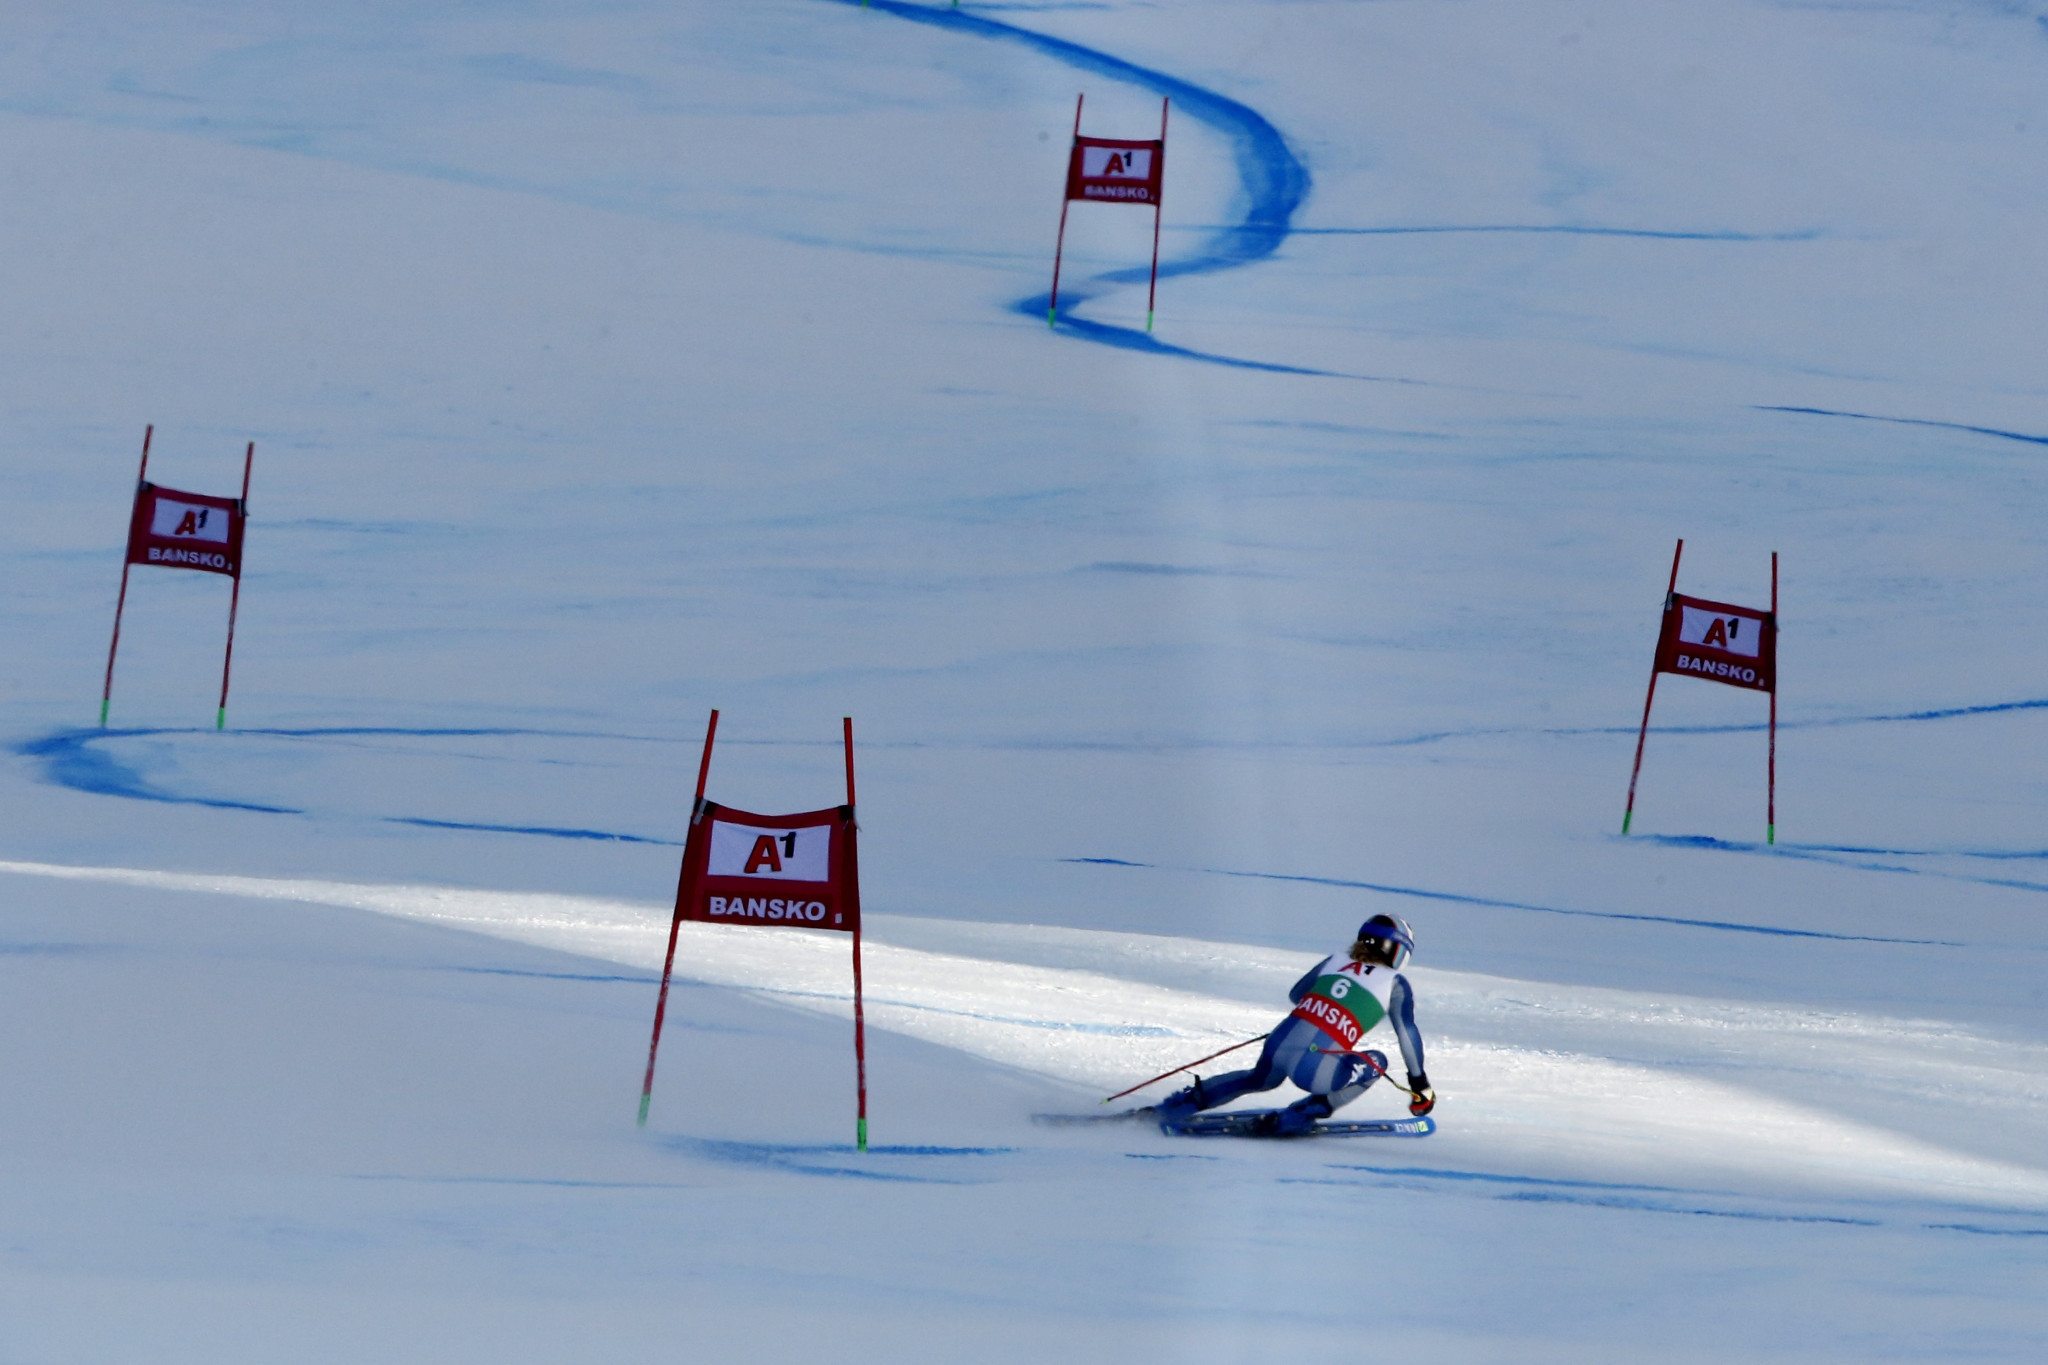 Fewer competitors and no fans at 2021 Alpine Junior World Ski Championships to combat COVID-19